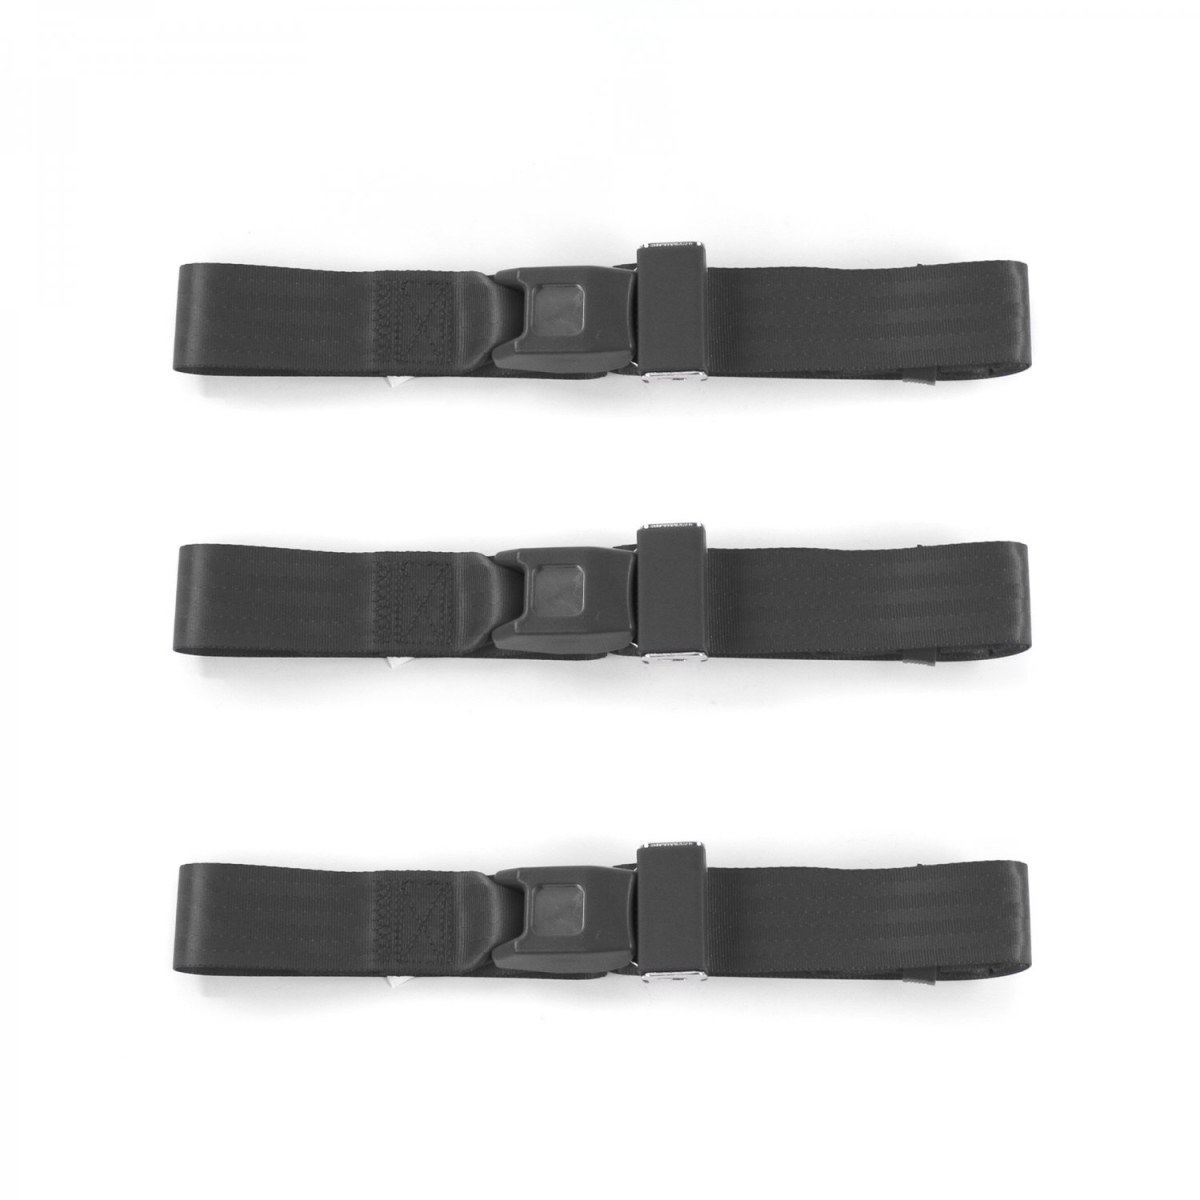 660634 Standard 2 Point Charcoal Lap Bench Seat Belt Kit for Ford Thunderbird 1955-1957 - 3 Belts -  safeTboy